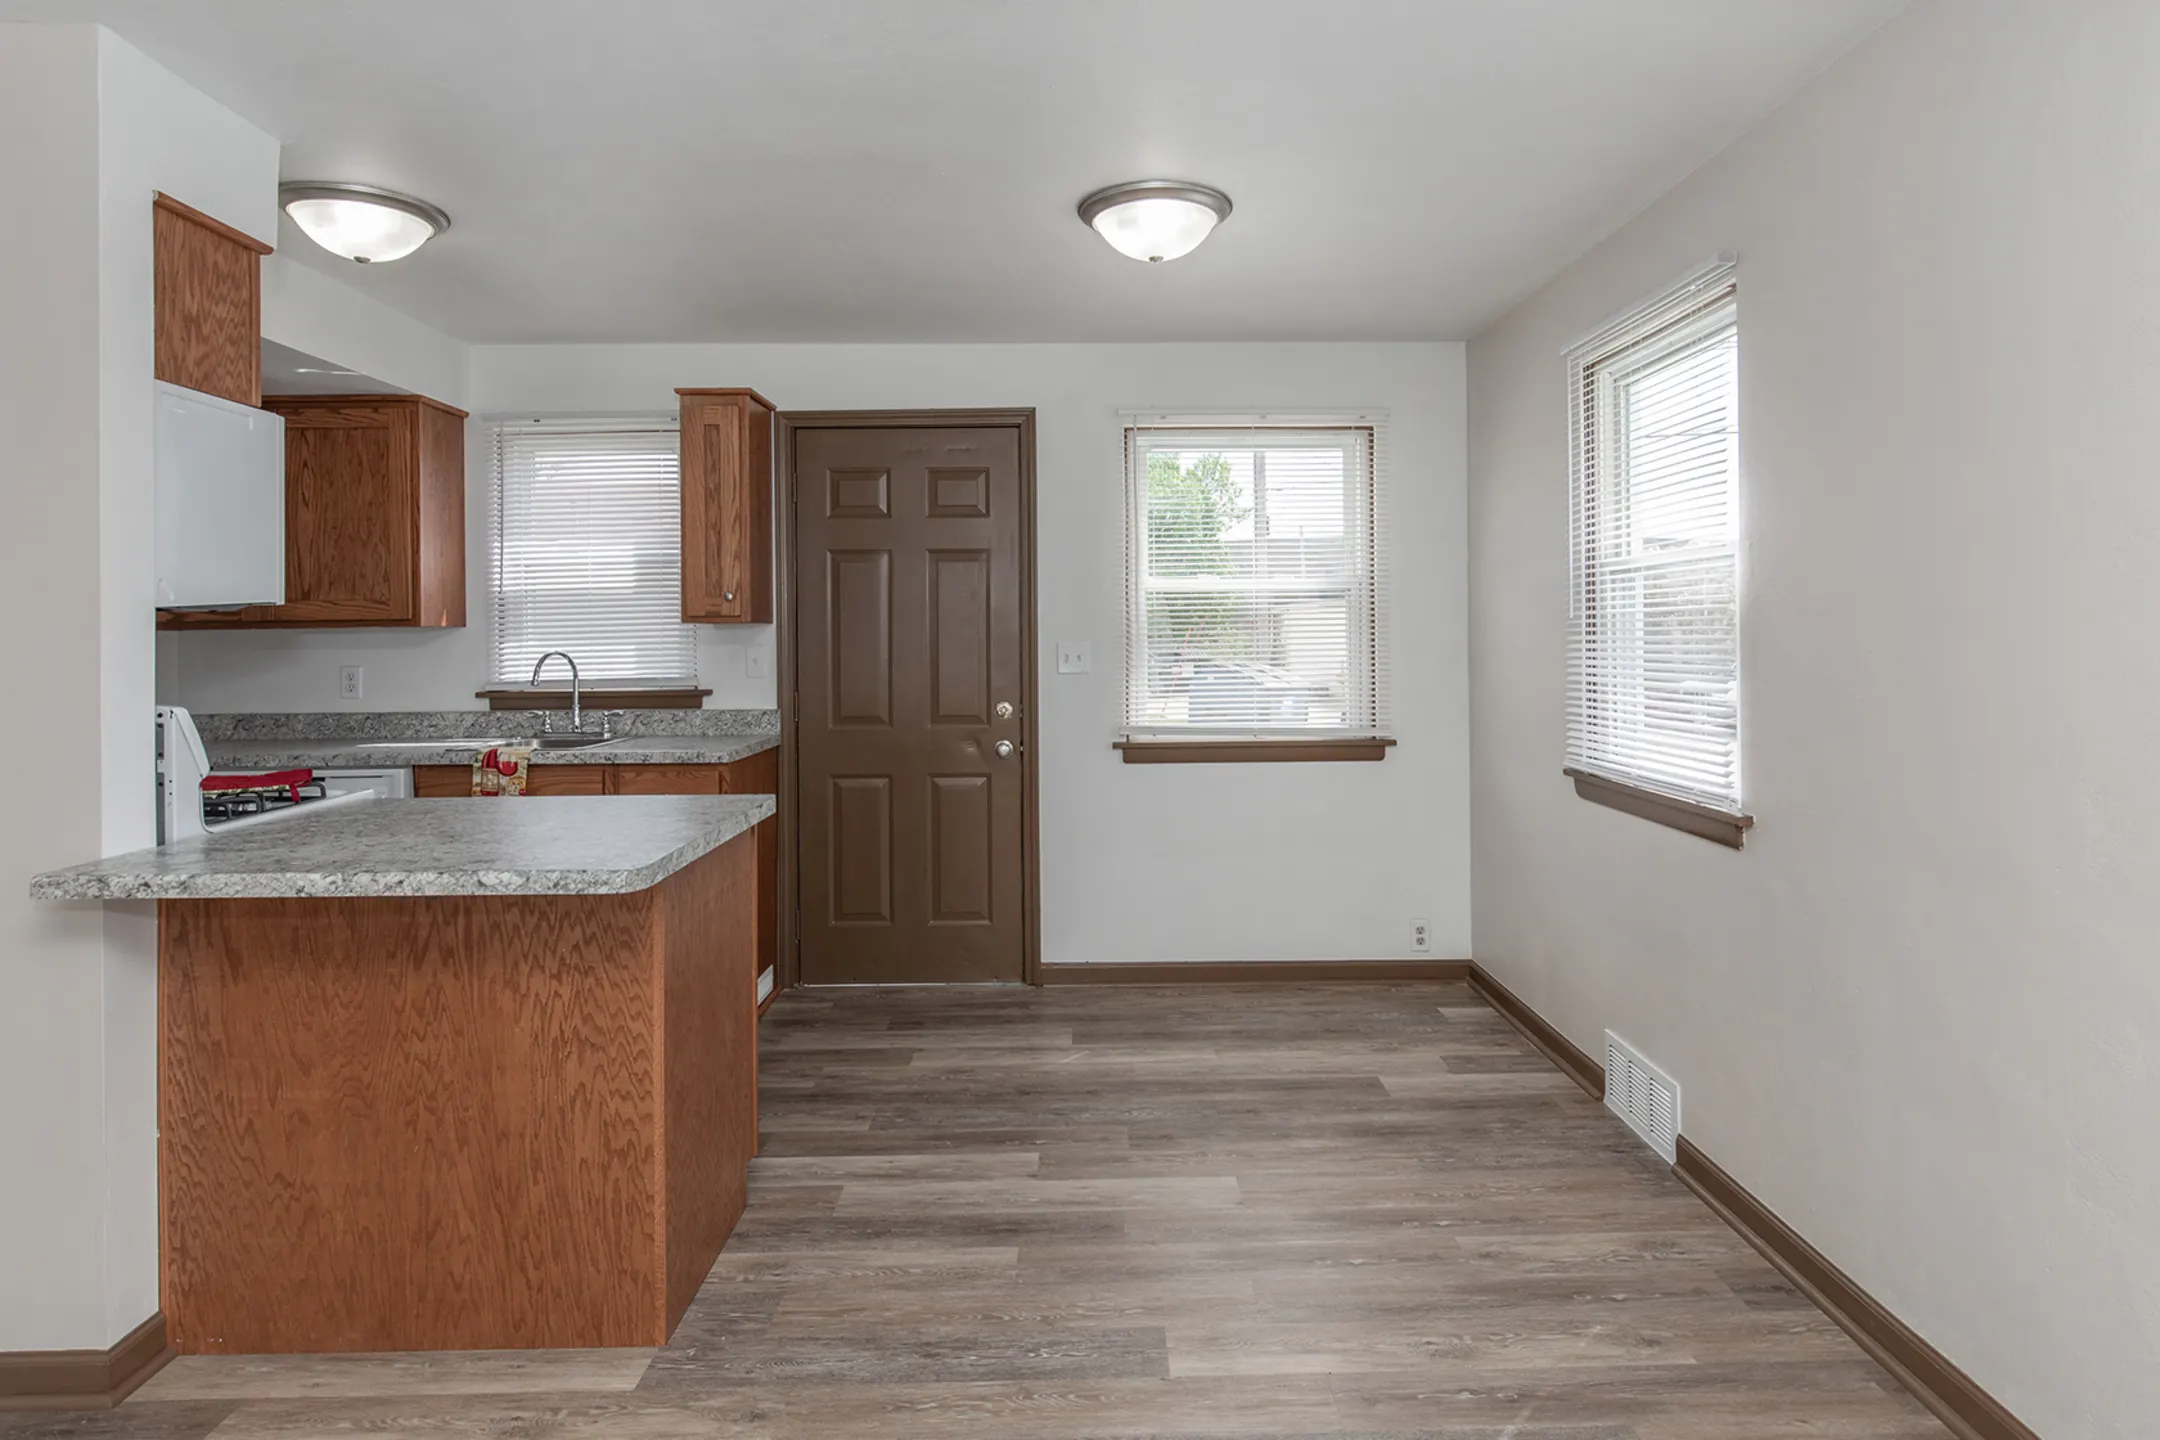 Kitchen - Downtown Town Homes - Bettendorf, IA